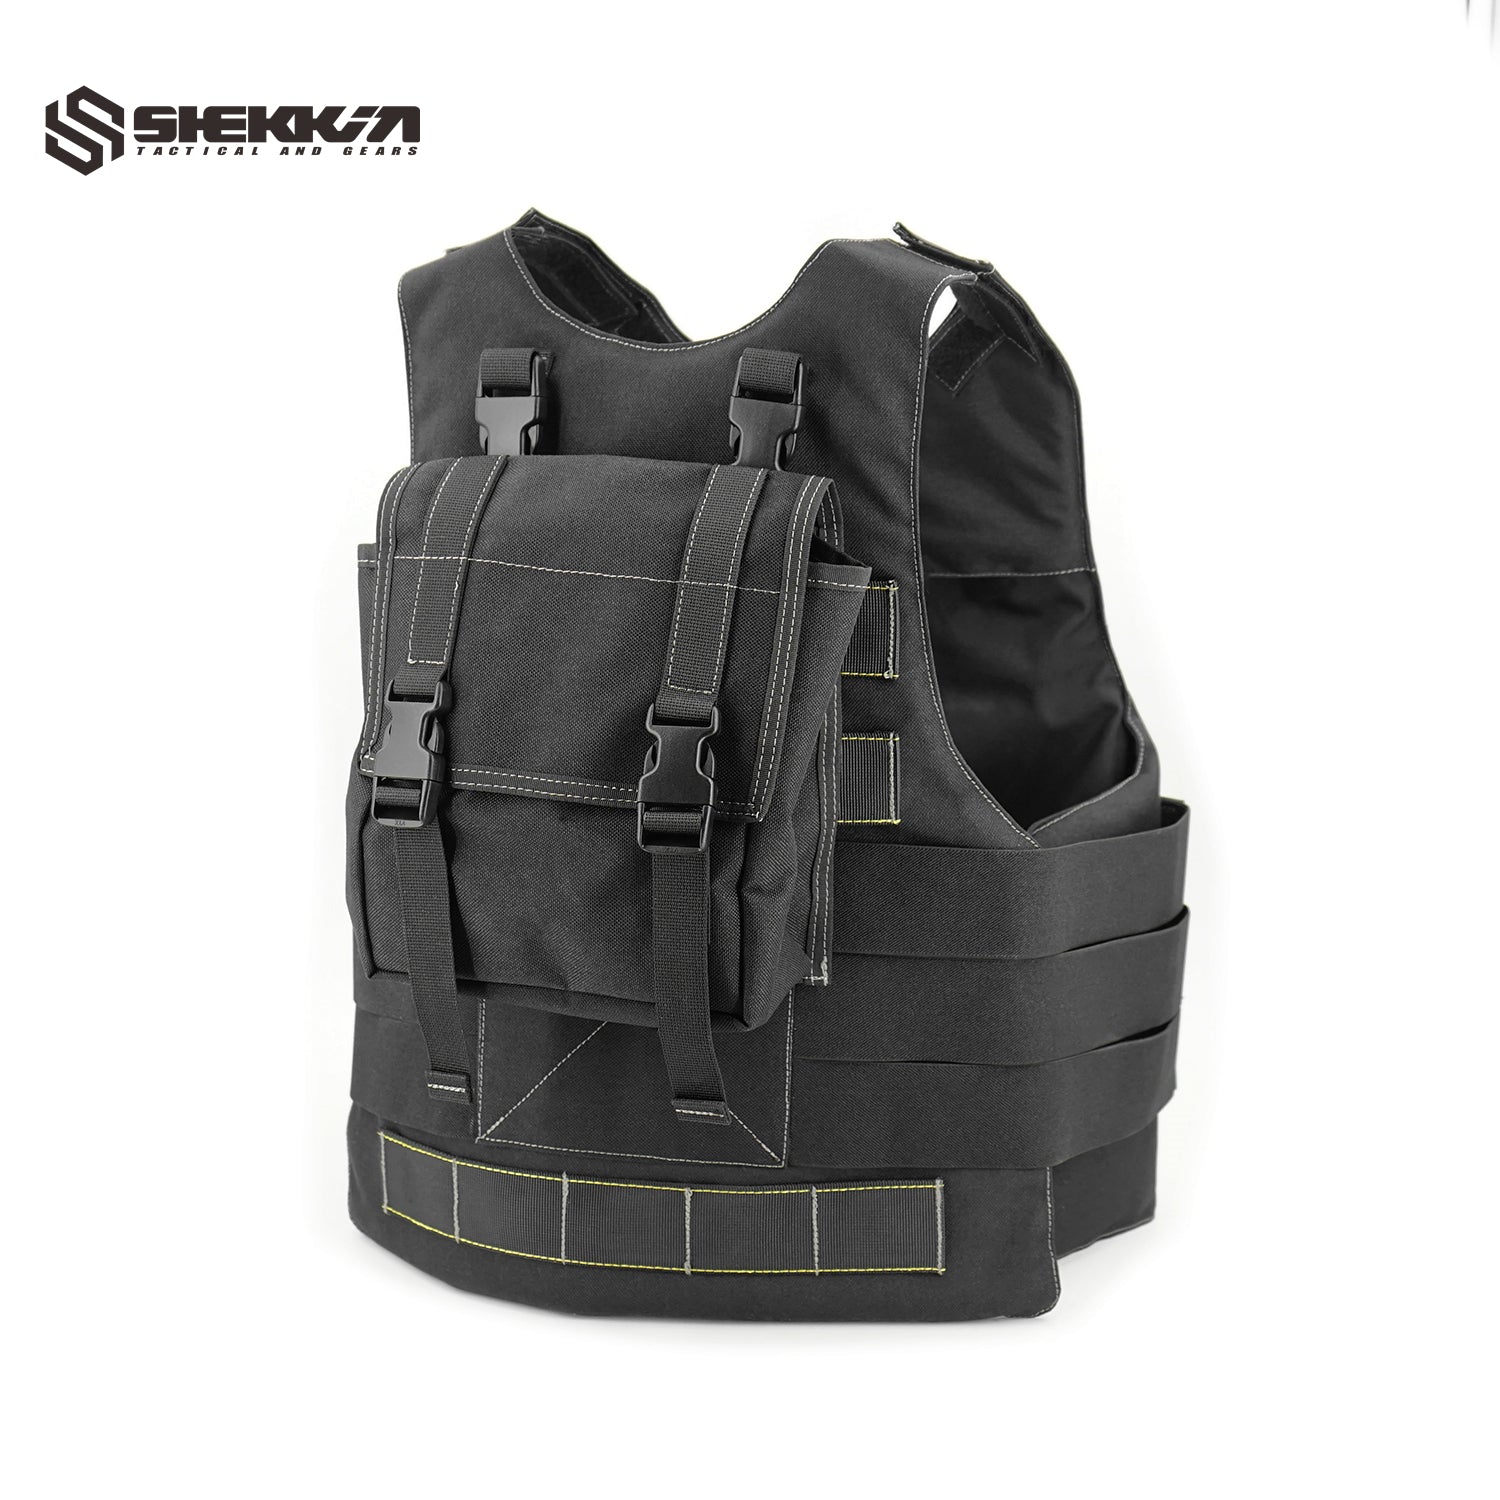 TG FAUST style NATO Special Forces Body Armor with back pack - Shekkin Gears